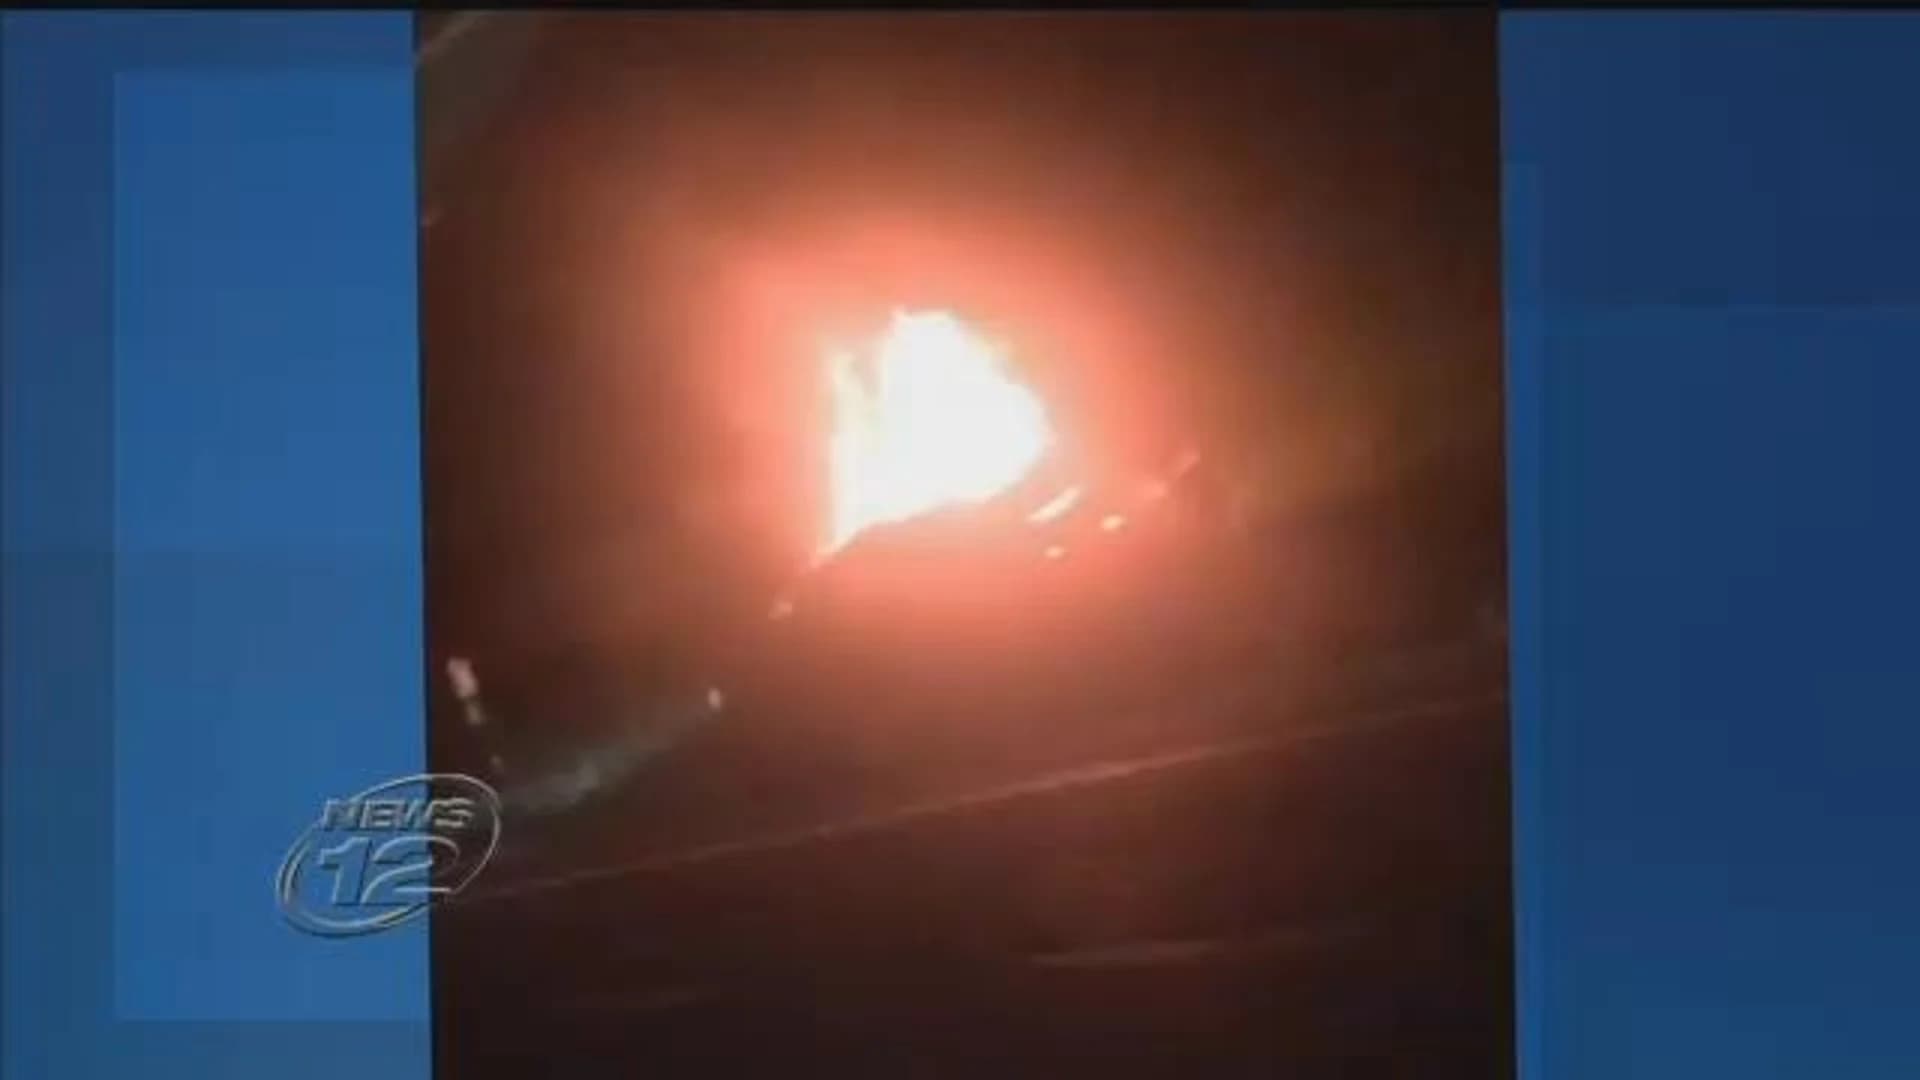 Car catches fire on Sprain Brook Parkway